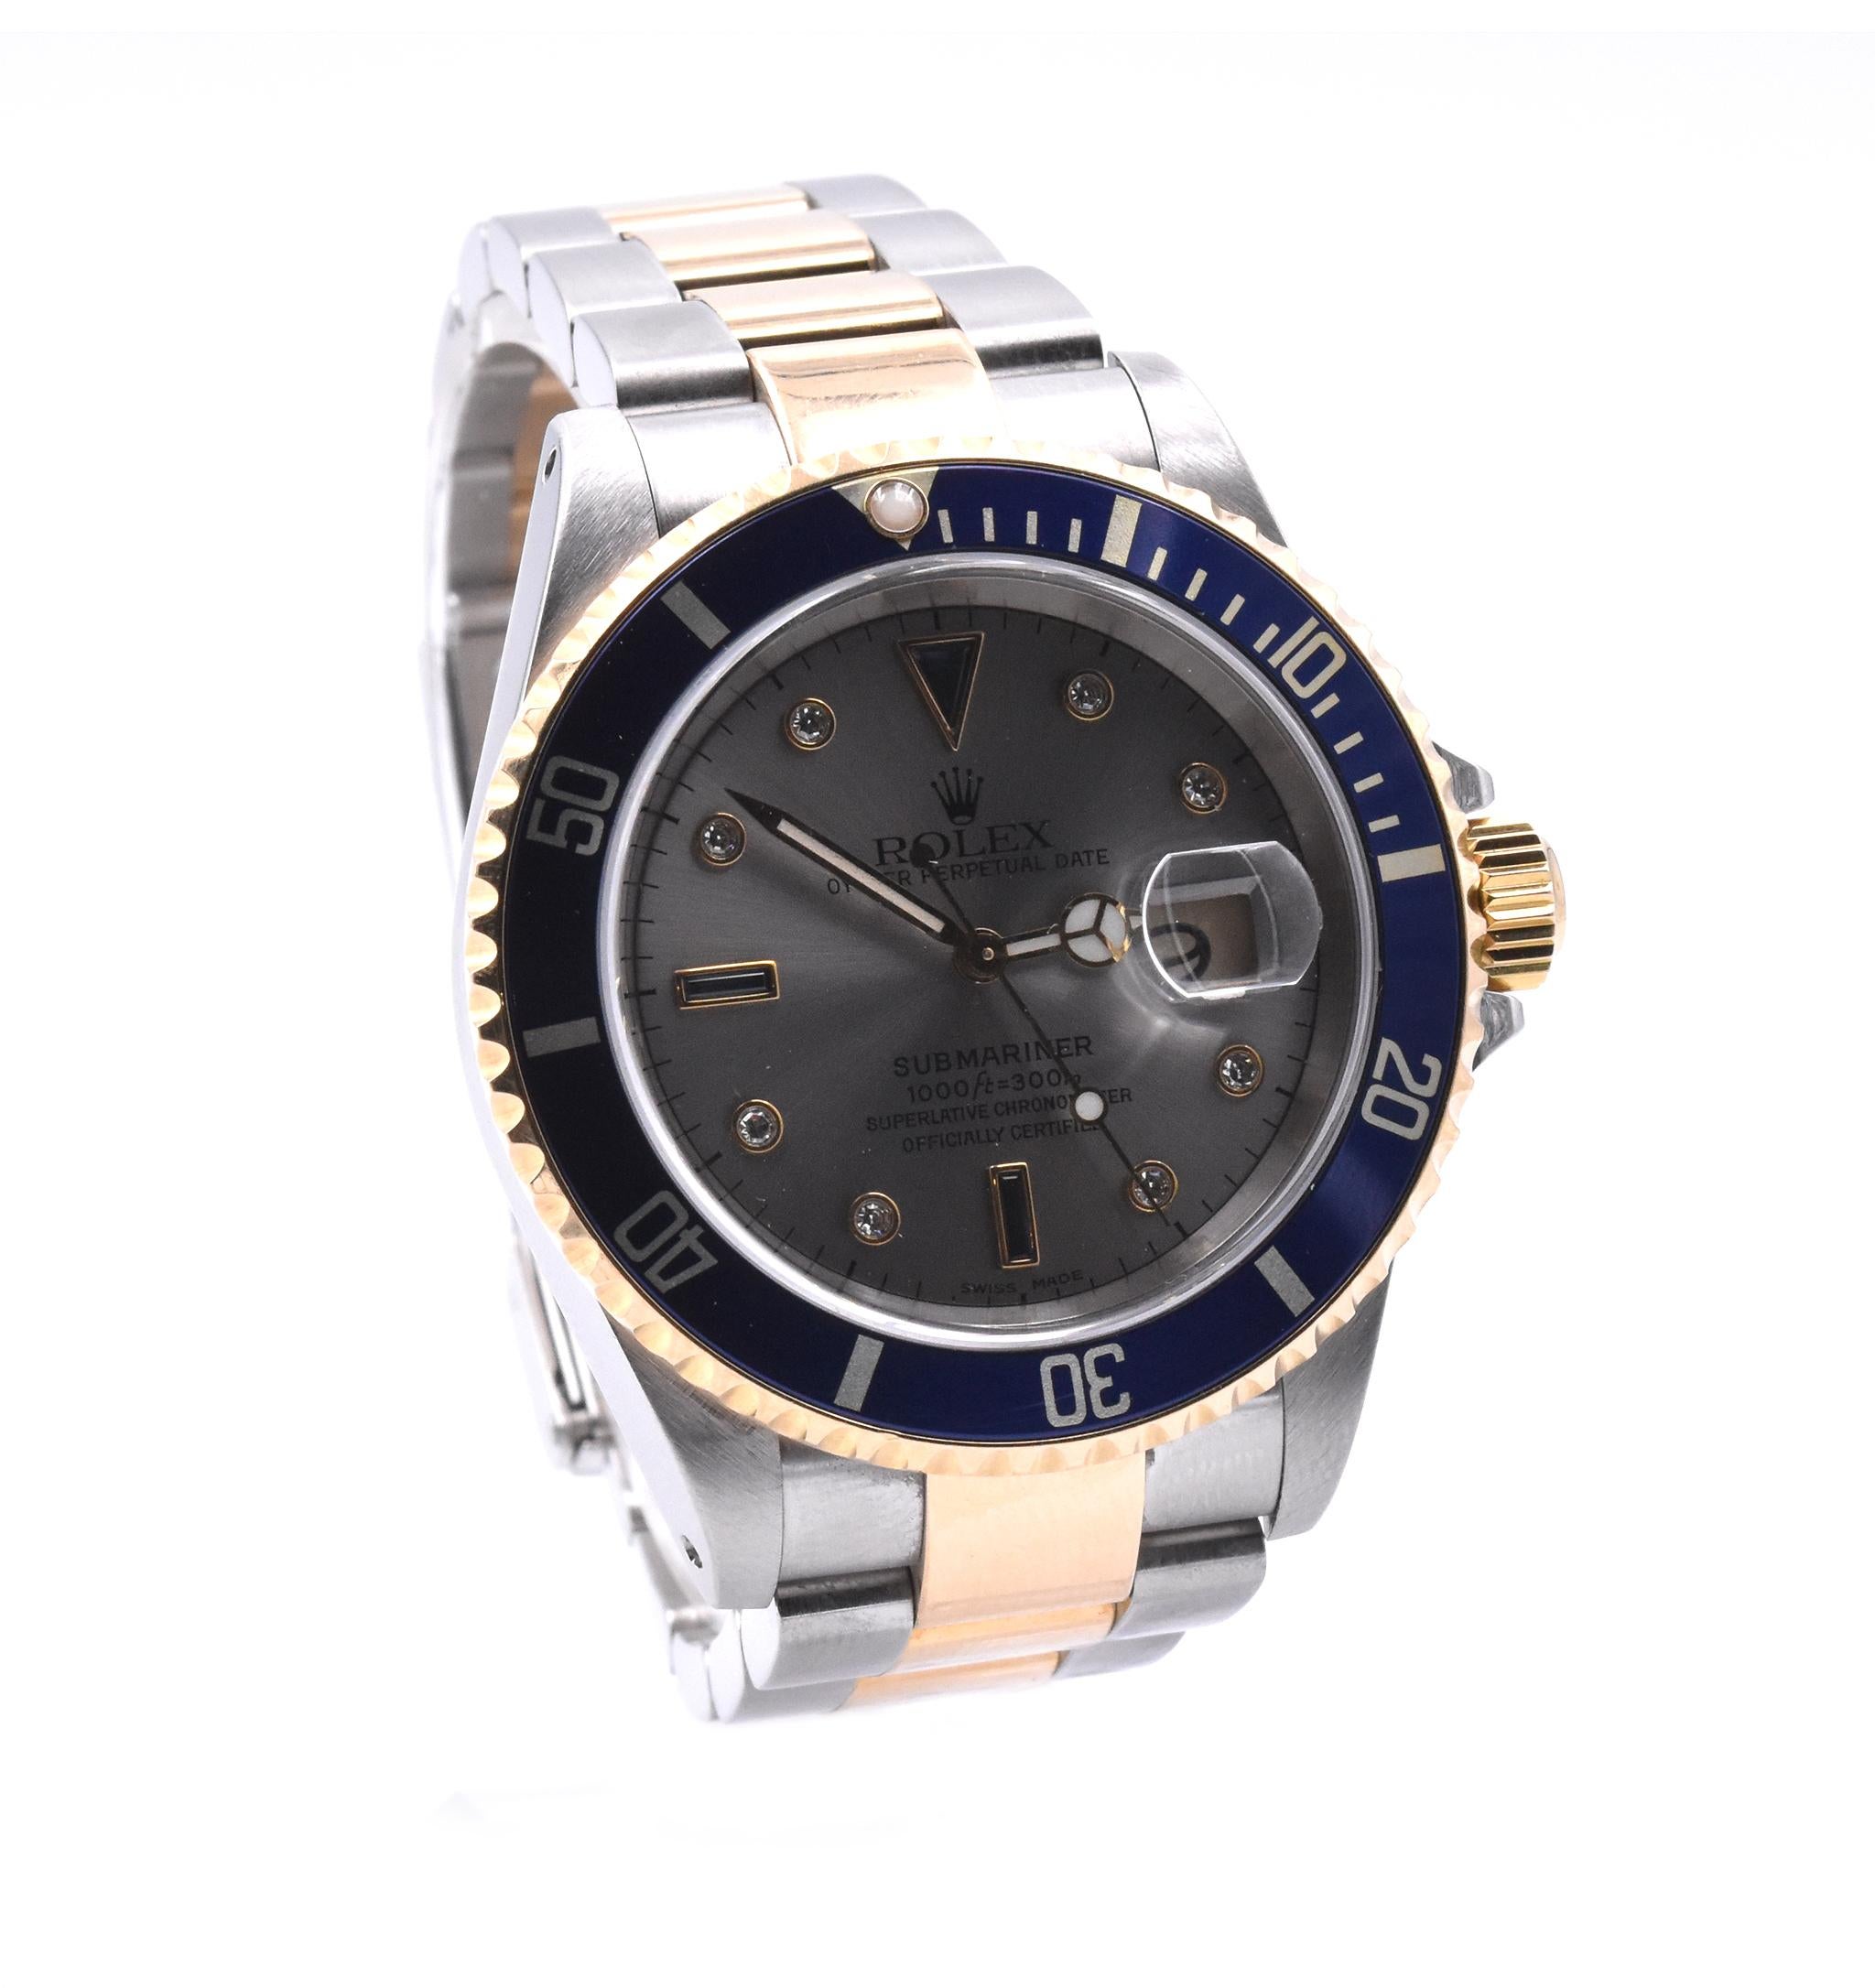 Designer: Rolex
Movement: automatic 
Function: hours, minutes, seconds, date
Case: 40mm stainless-steel case, sapphire crystal, 18k yellow gold bezel with blue insert, yellow gold screw-down crown, waterproof to 100 meters
Band: two-tone 18k yellow